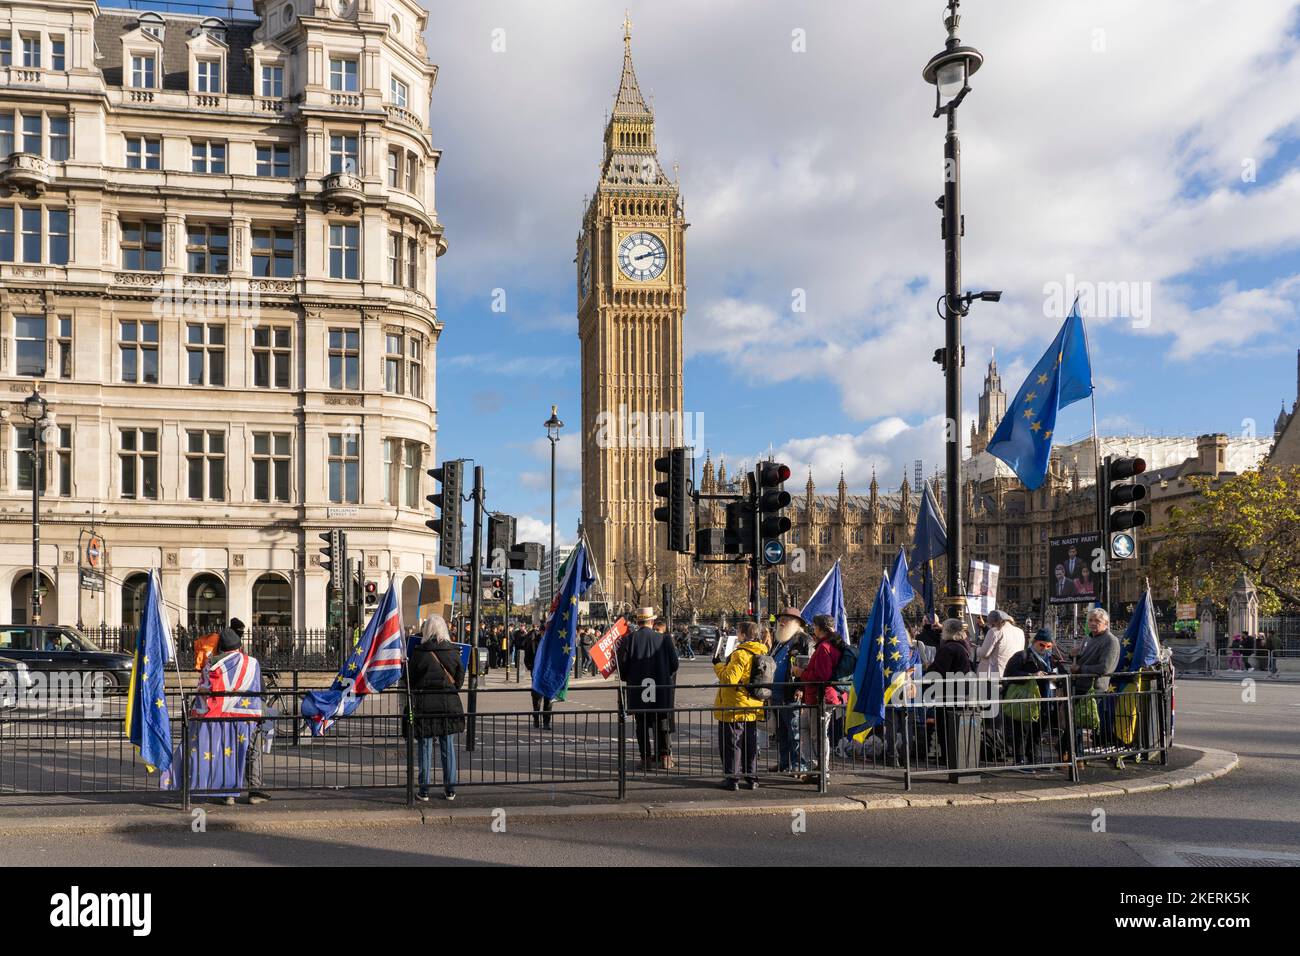 A protest group near the Houses of Parliament and Big Ben, protesting against the Tory Party and Brexit, 9th Nov 2022. London, England Stock Photo